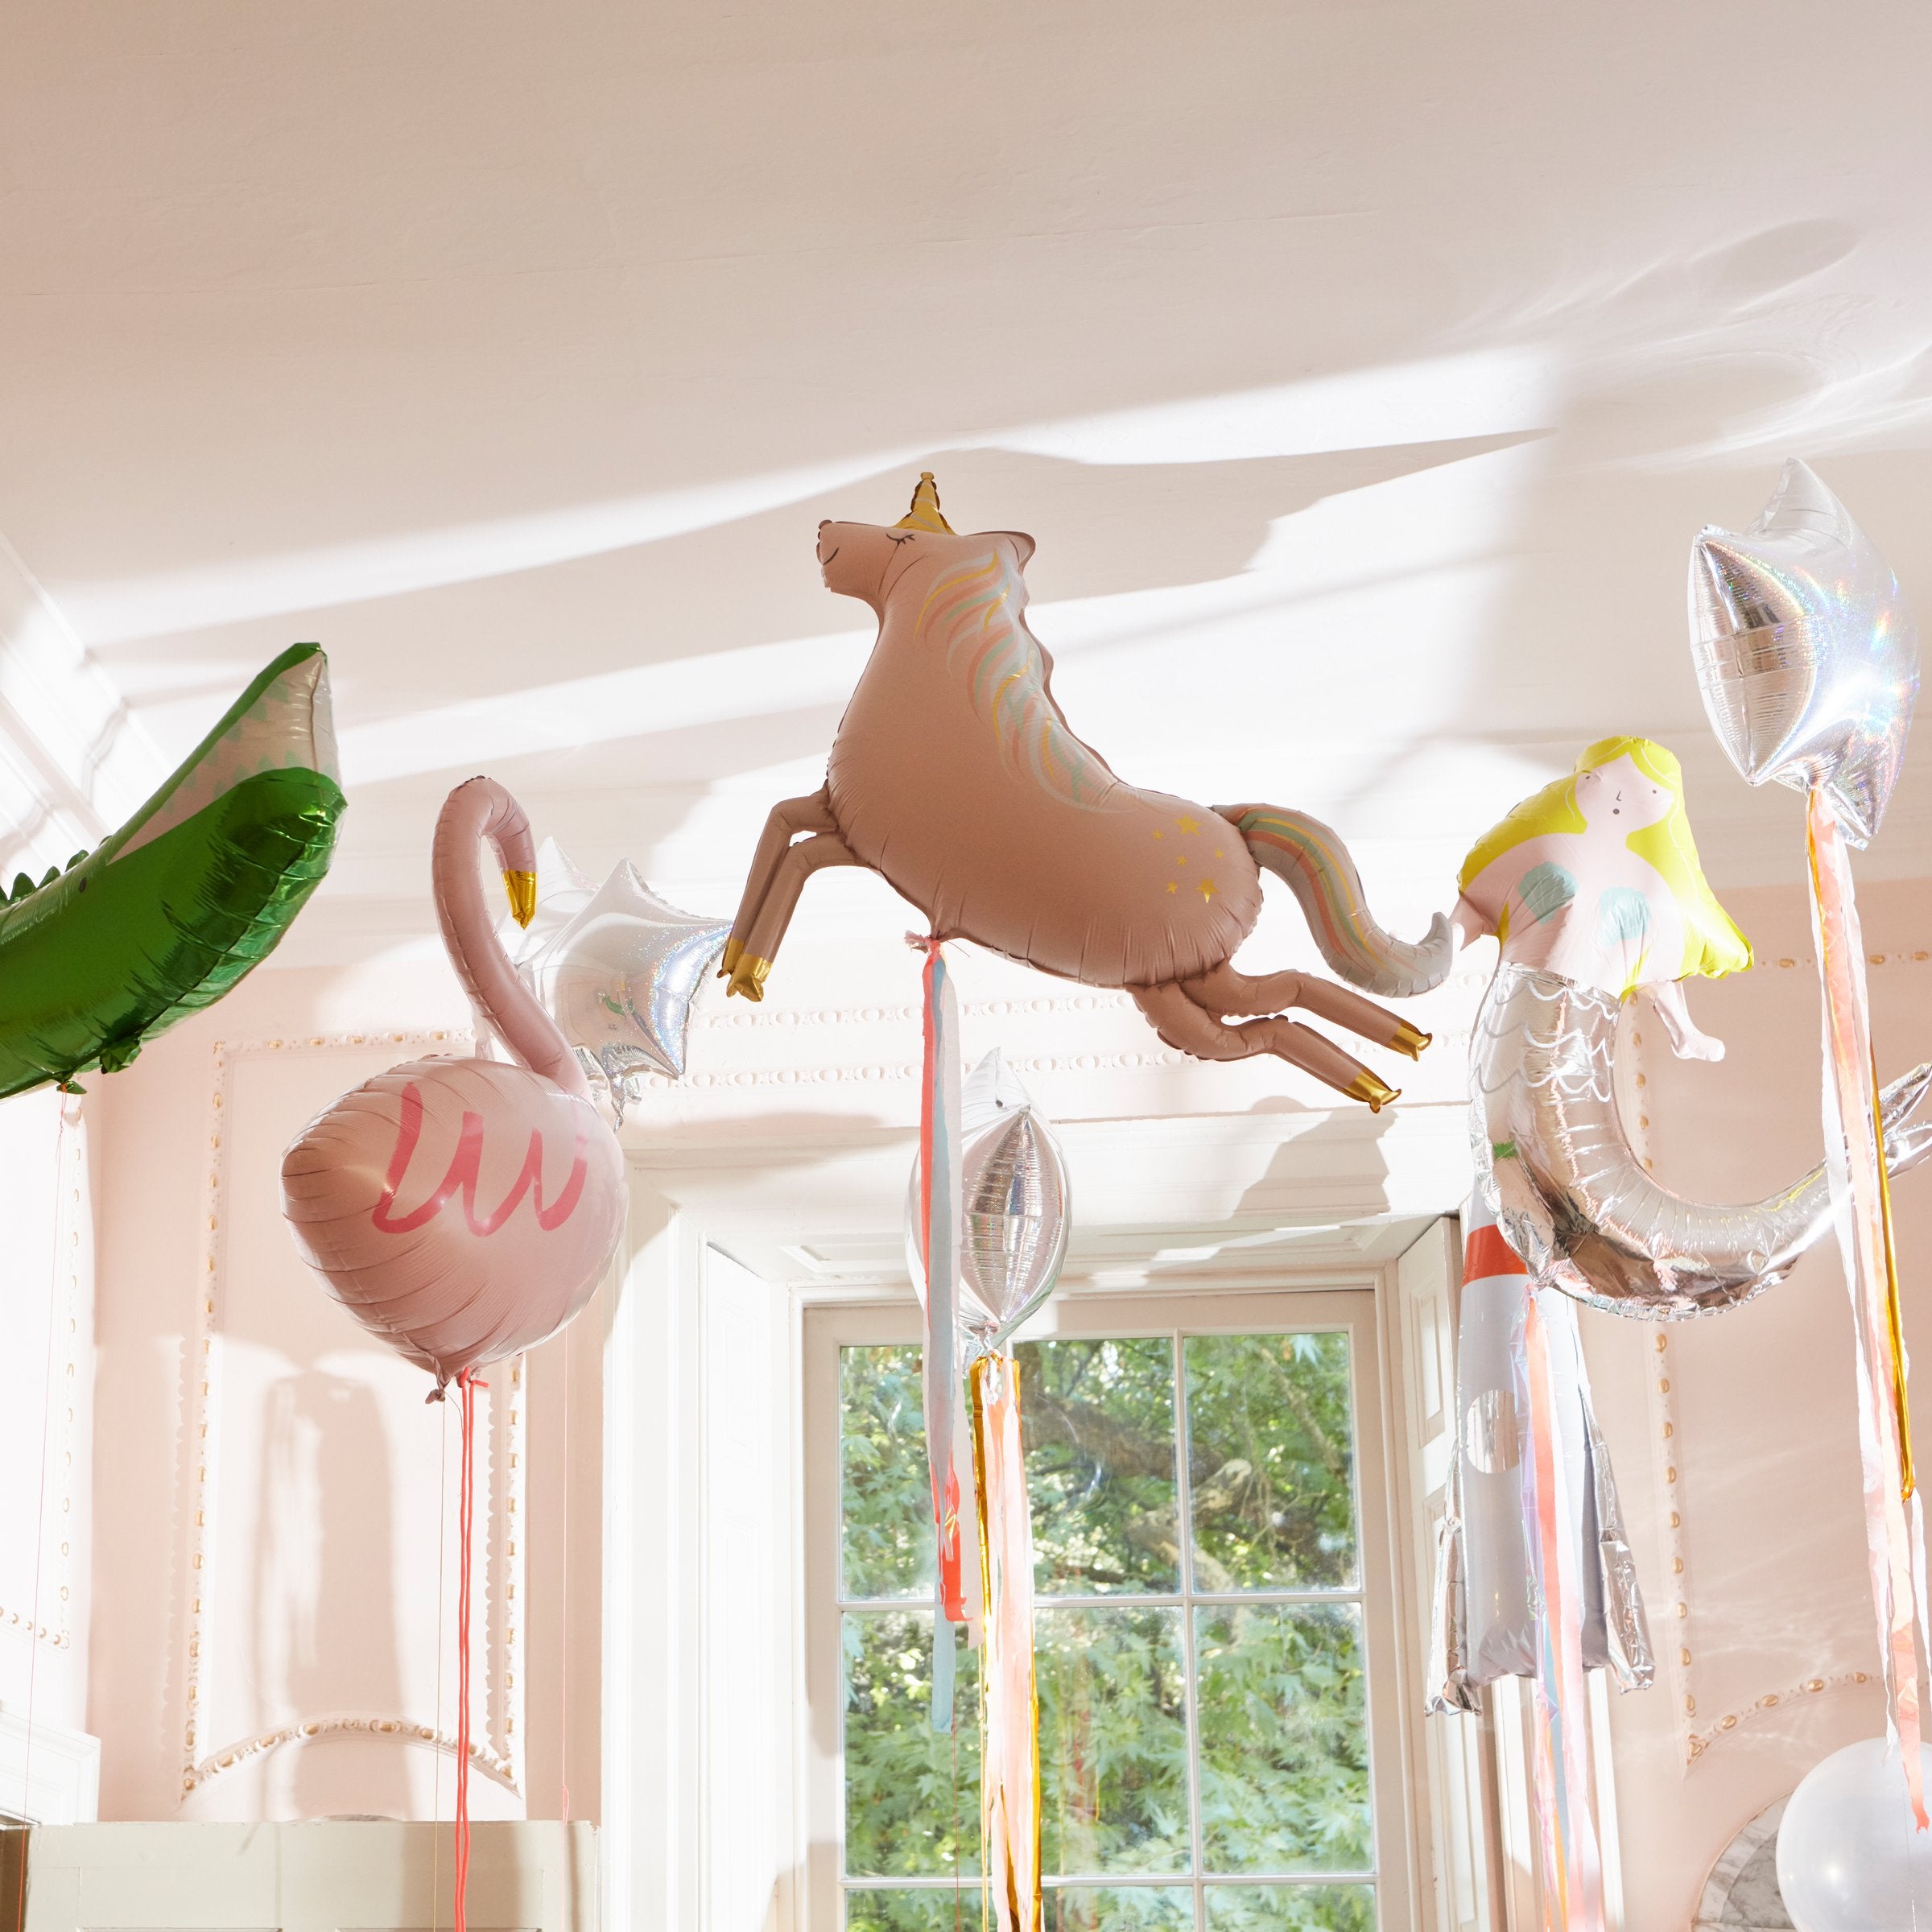 The unicorn balloon has printed foil details, a neon cord to hang it up with, and beautiful streamers for a special touch.